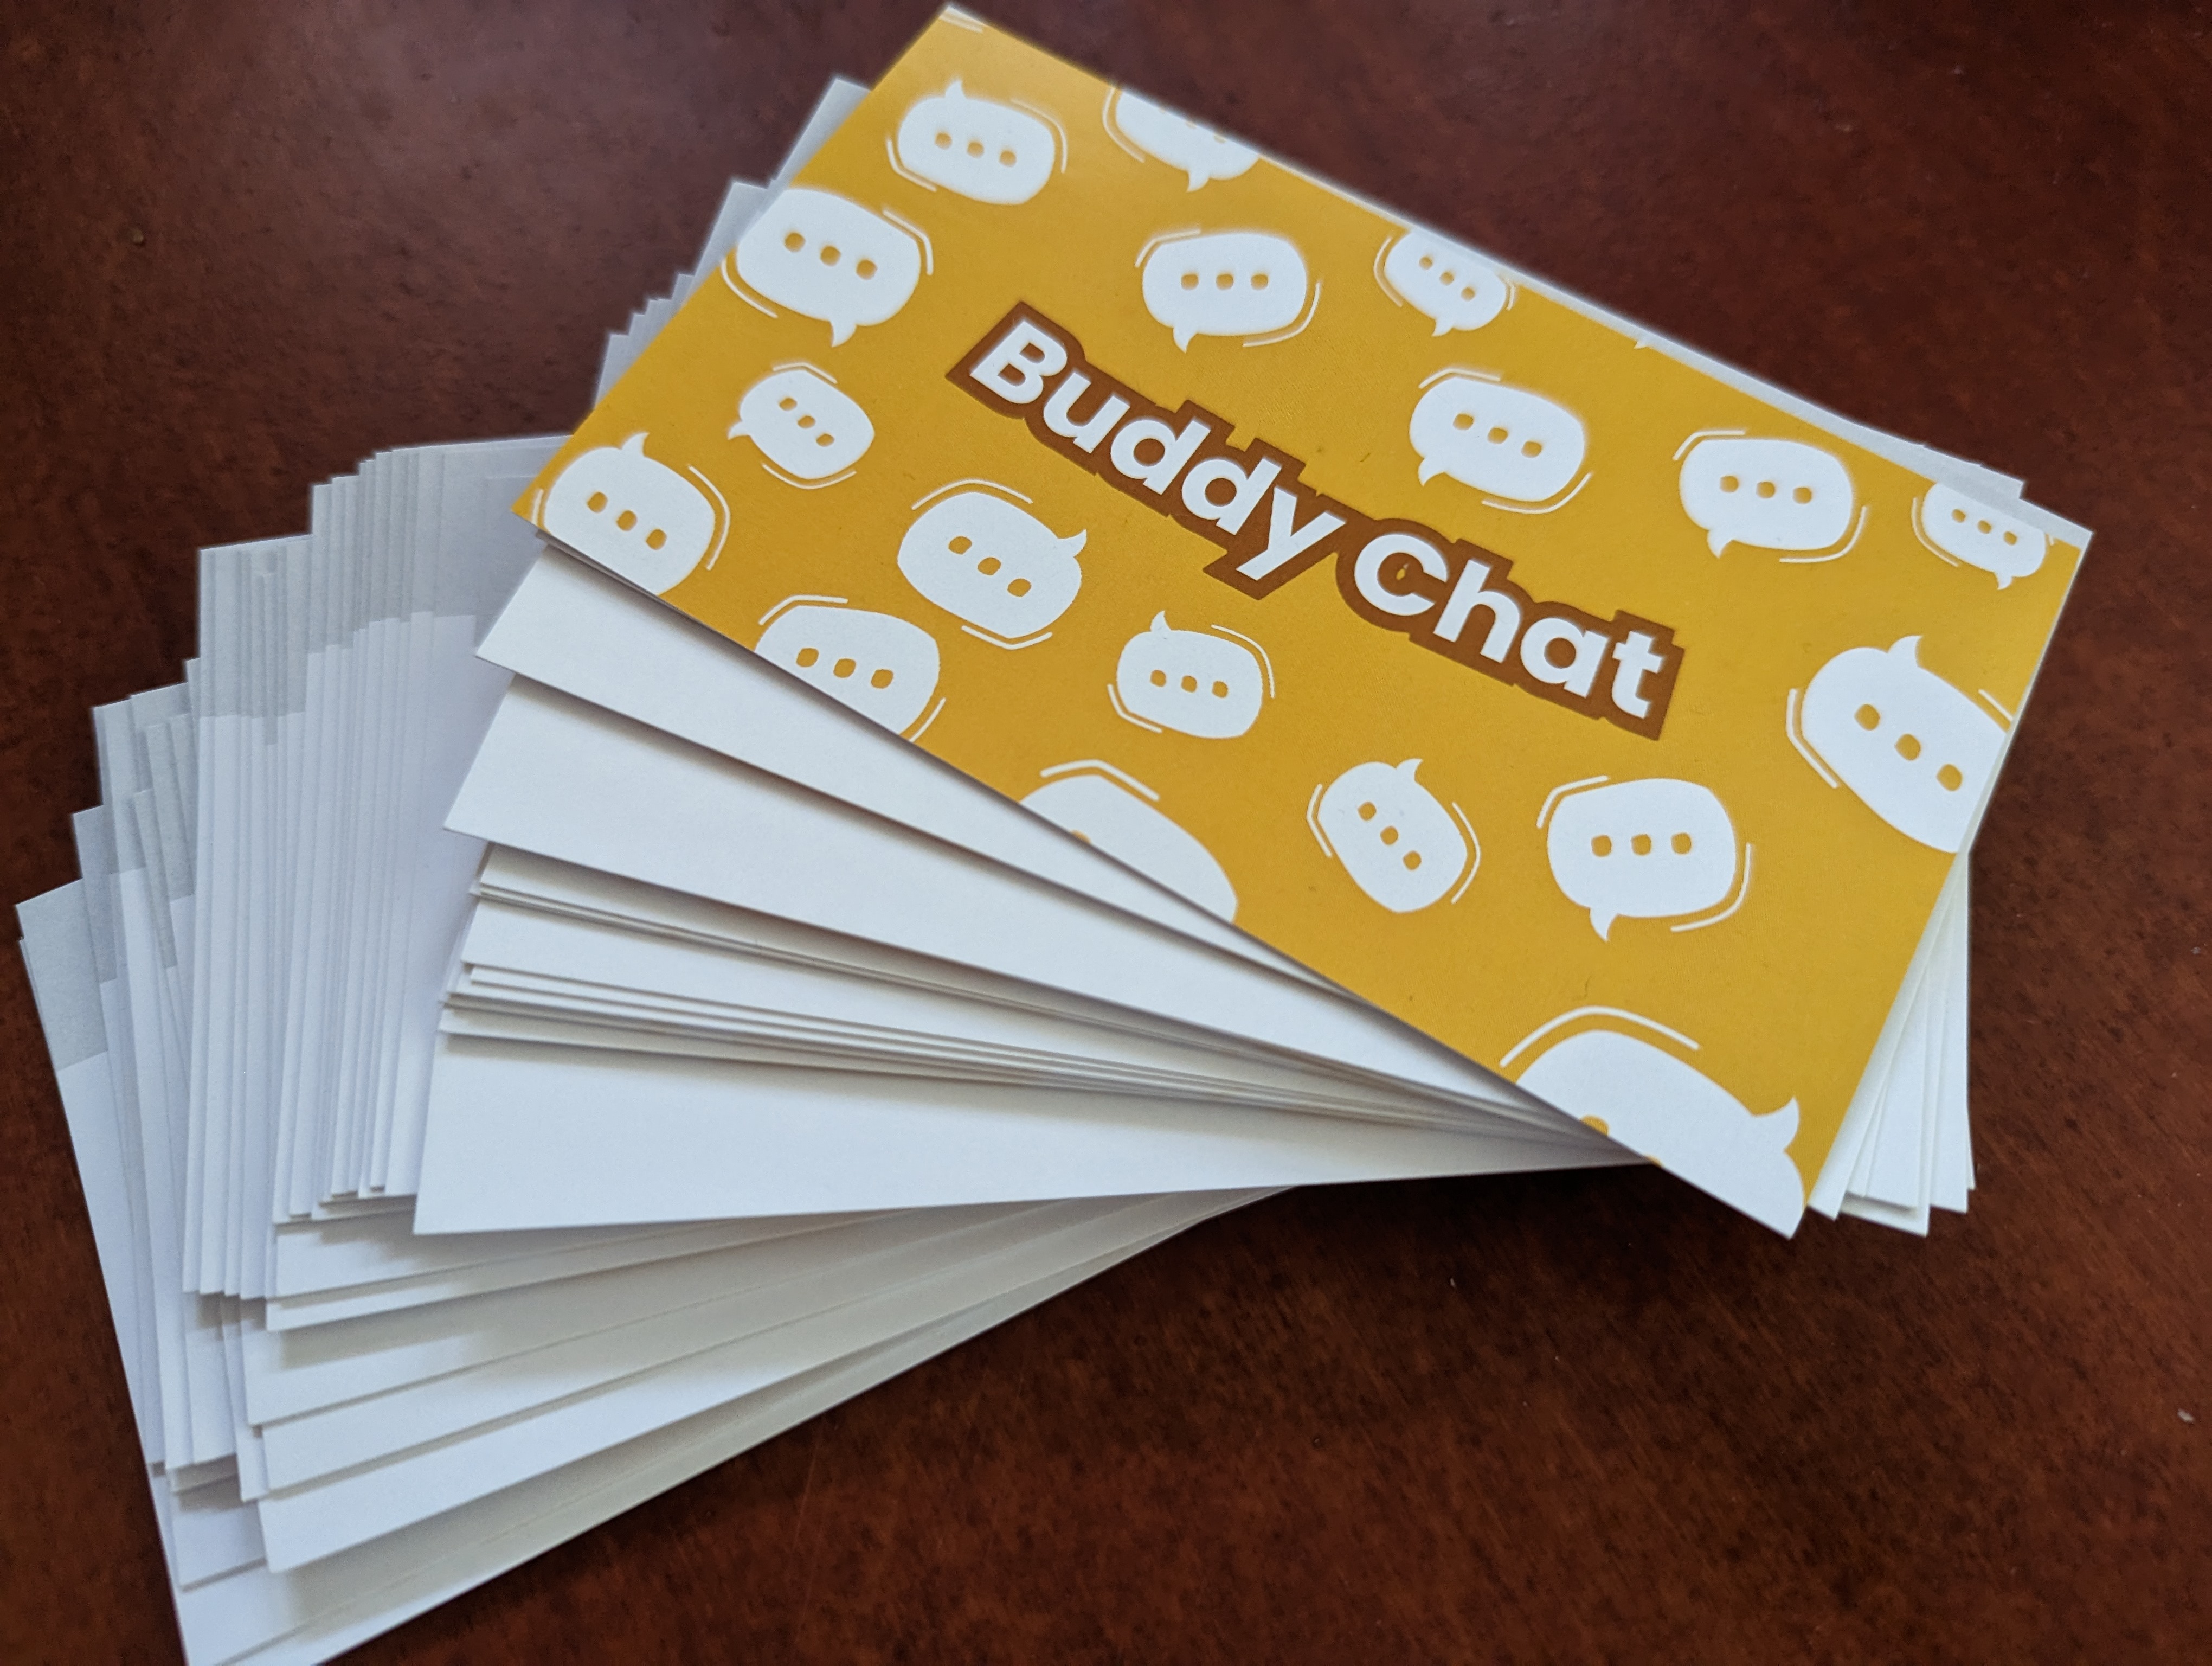 Buddy Chat cards